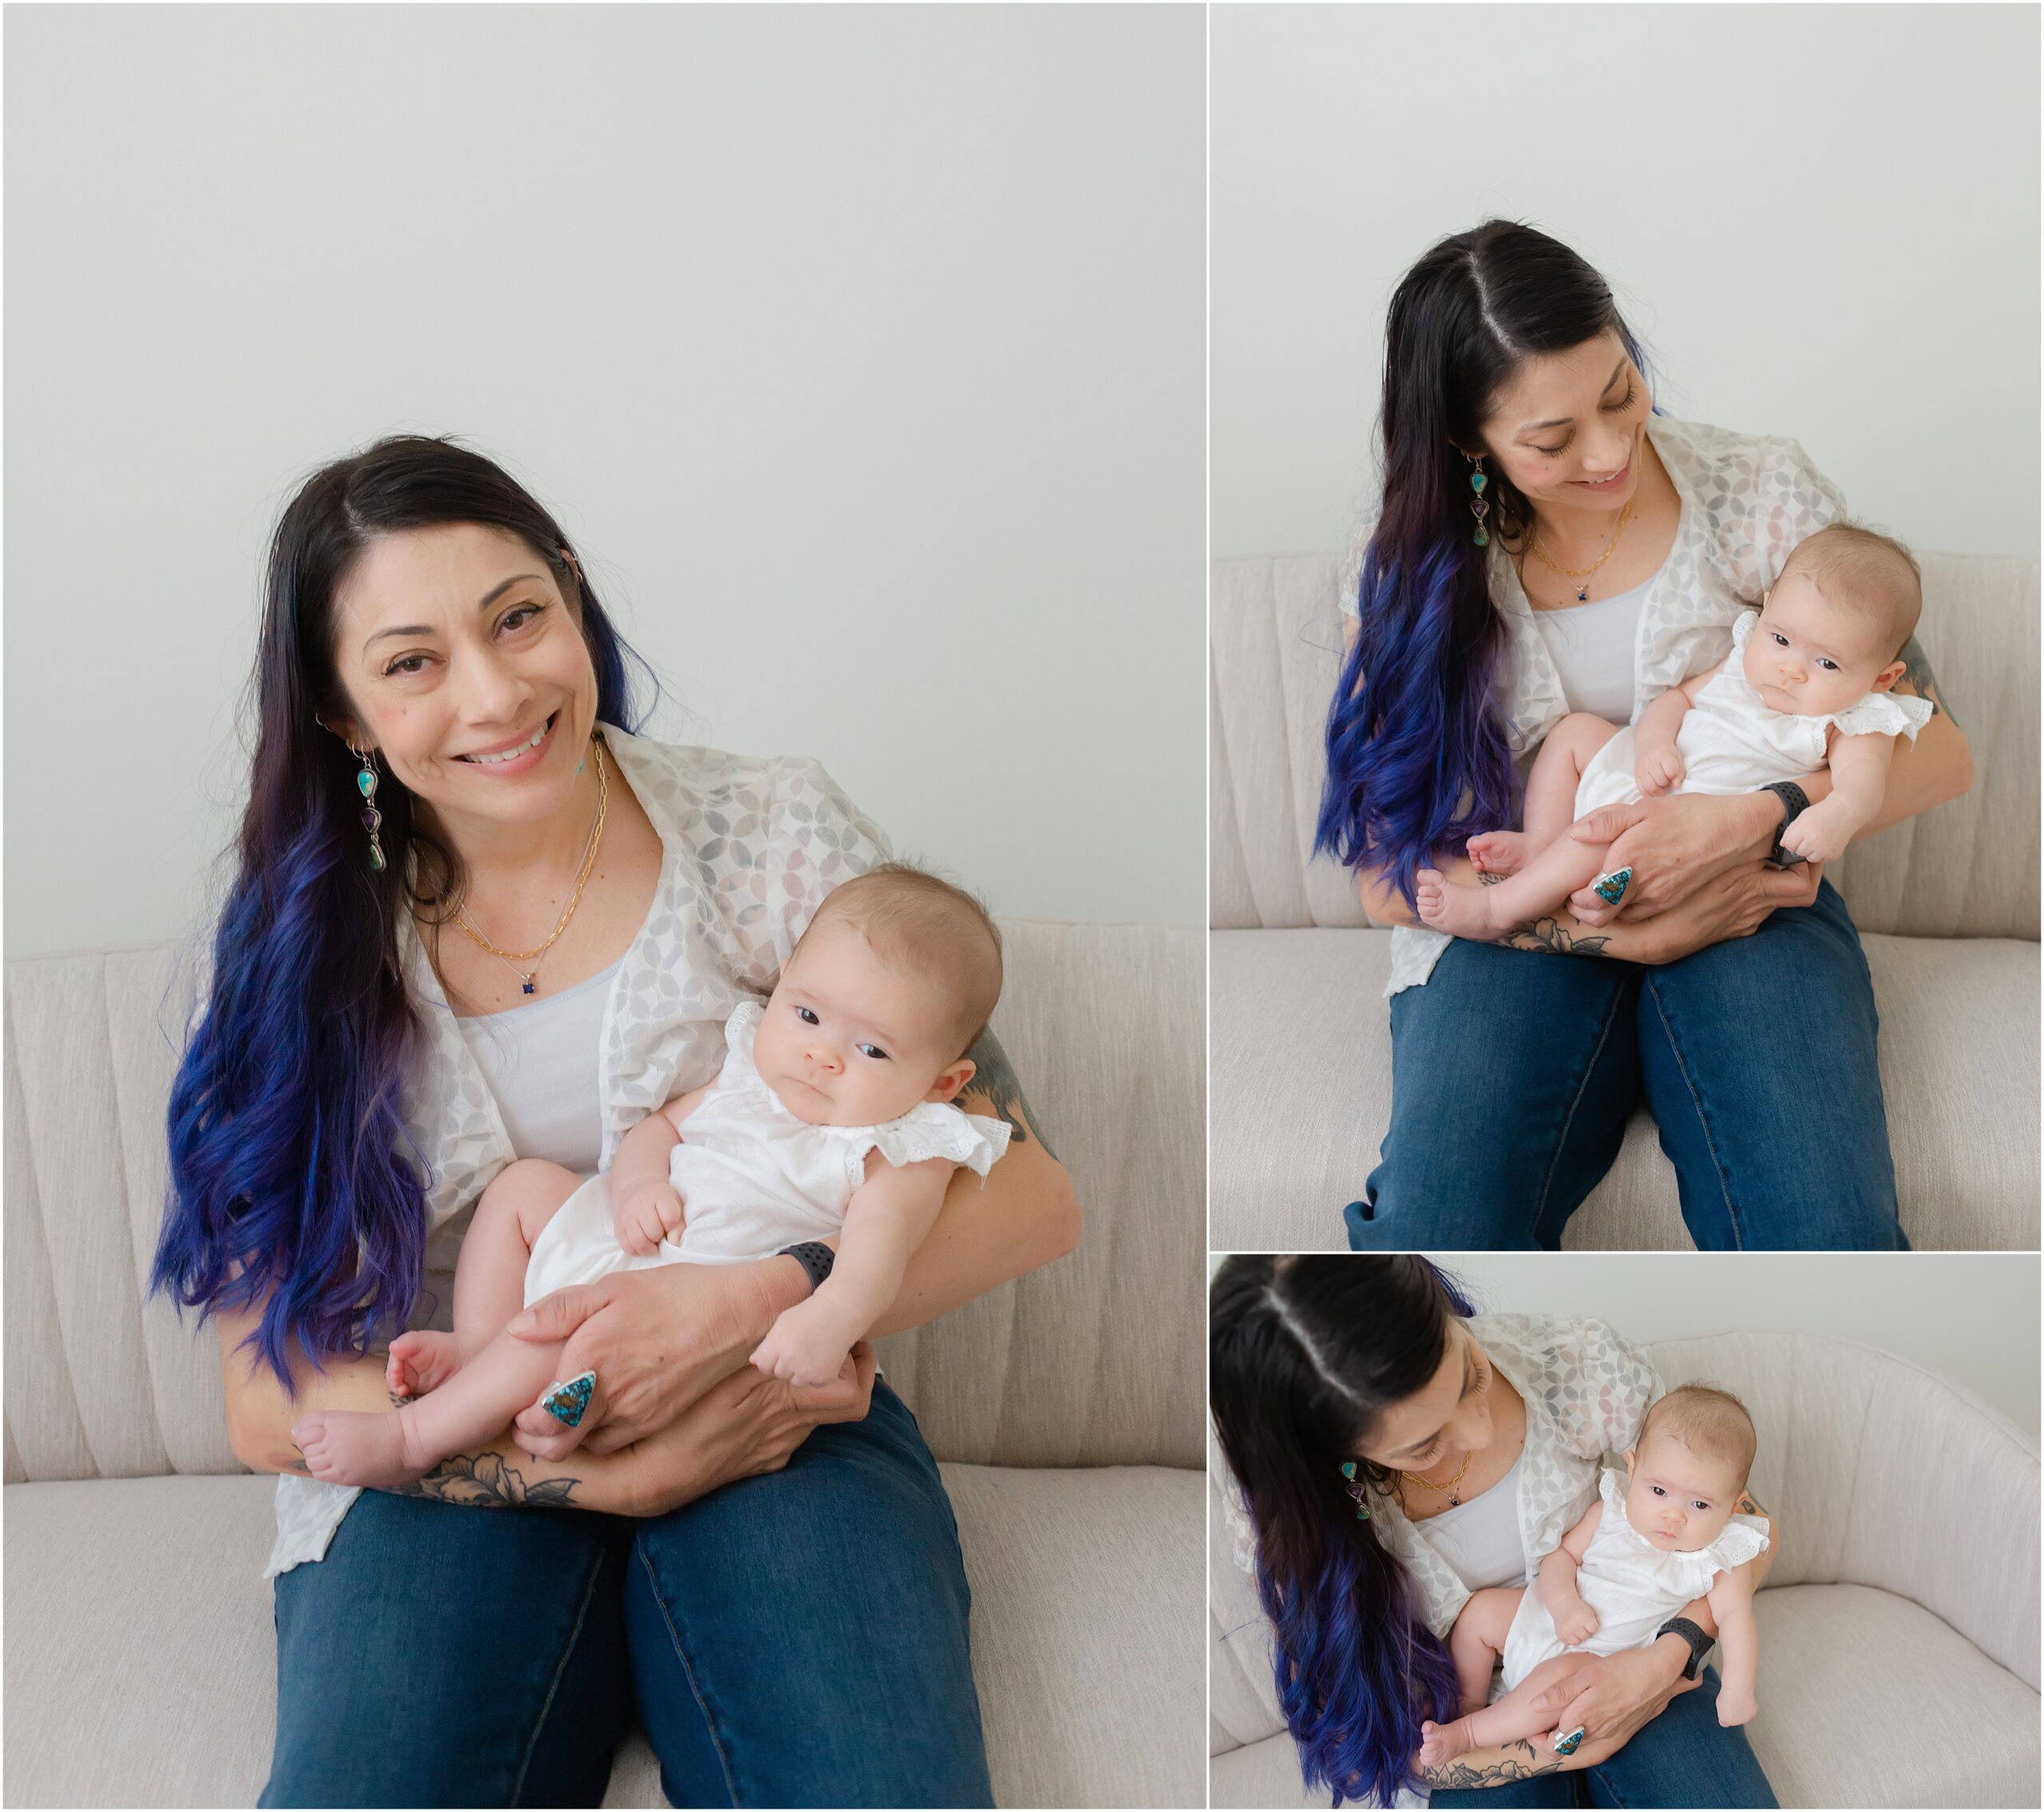 Collage of photos of a grandmother with black and purple hair holding her two month old granddaughter